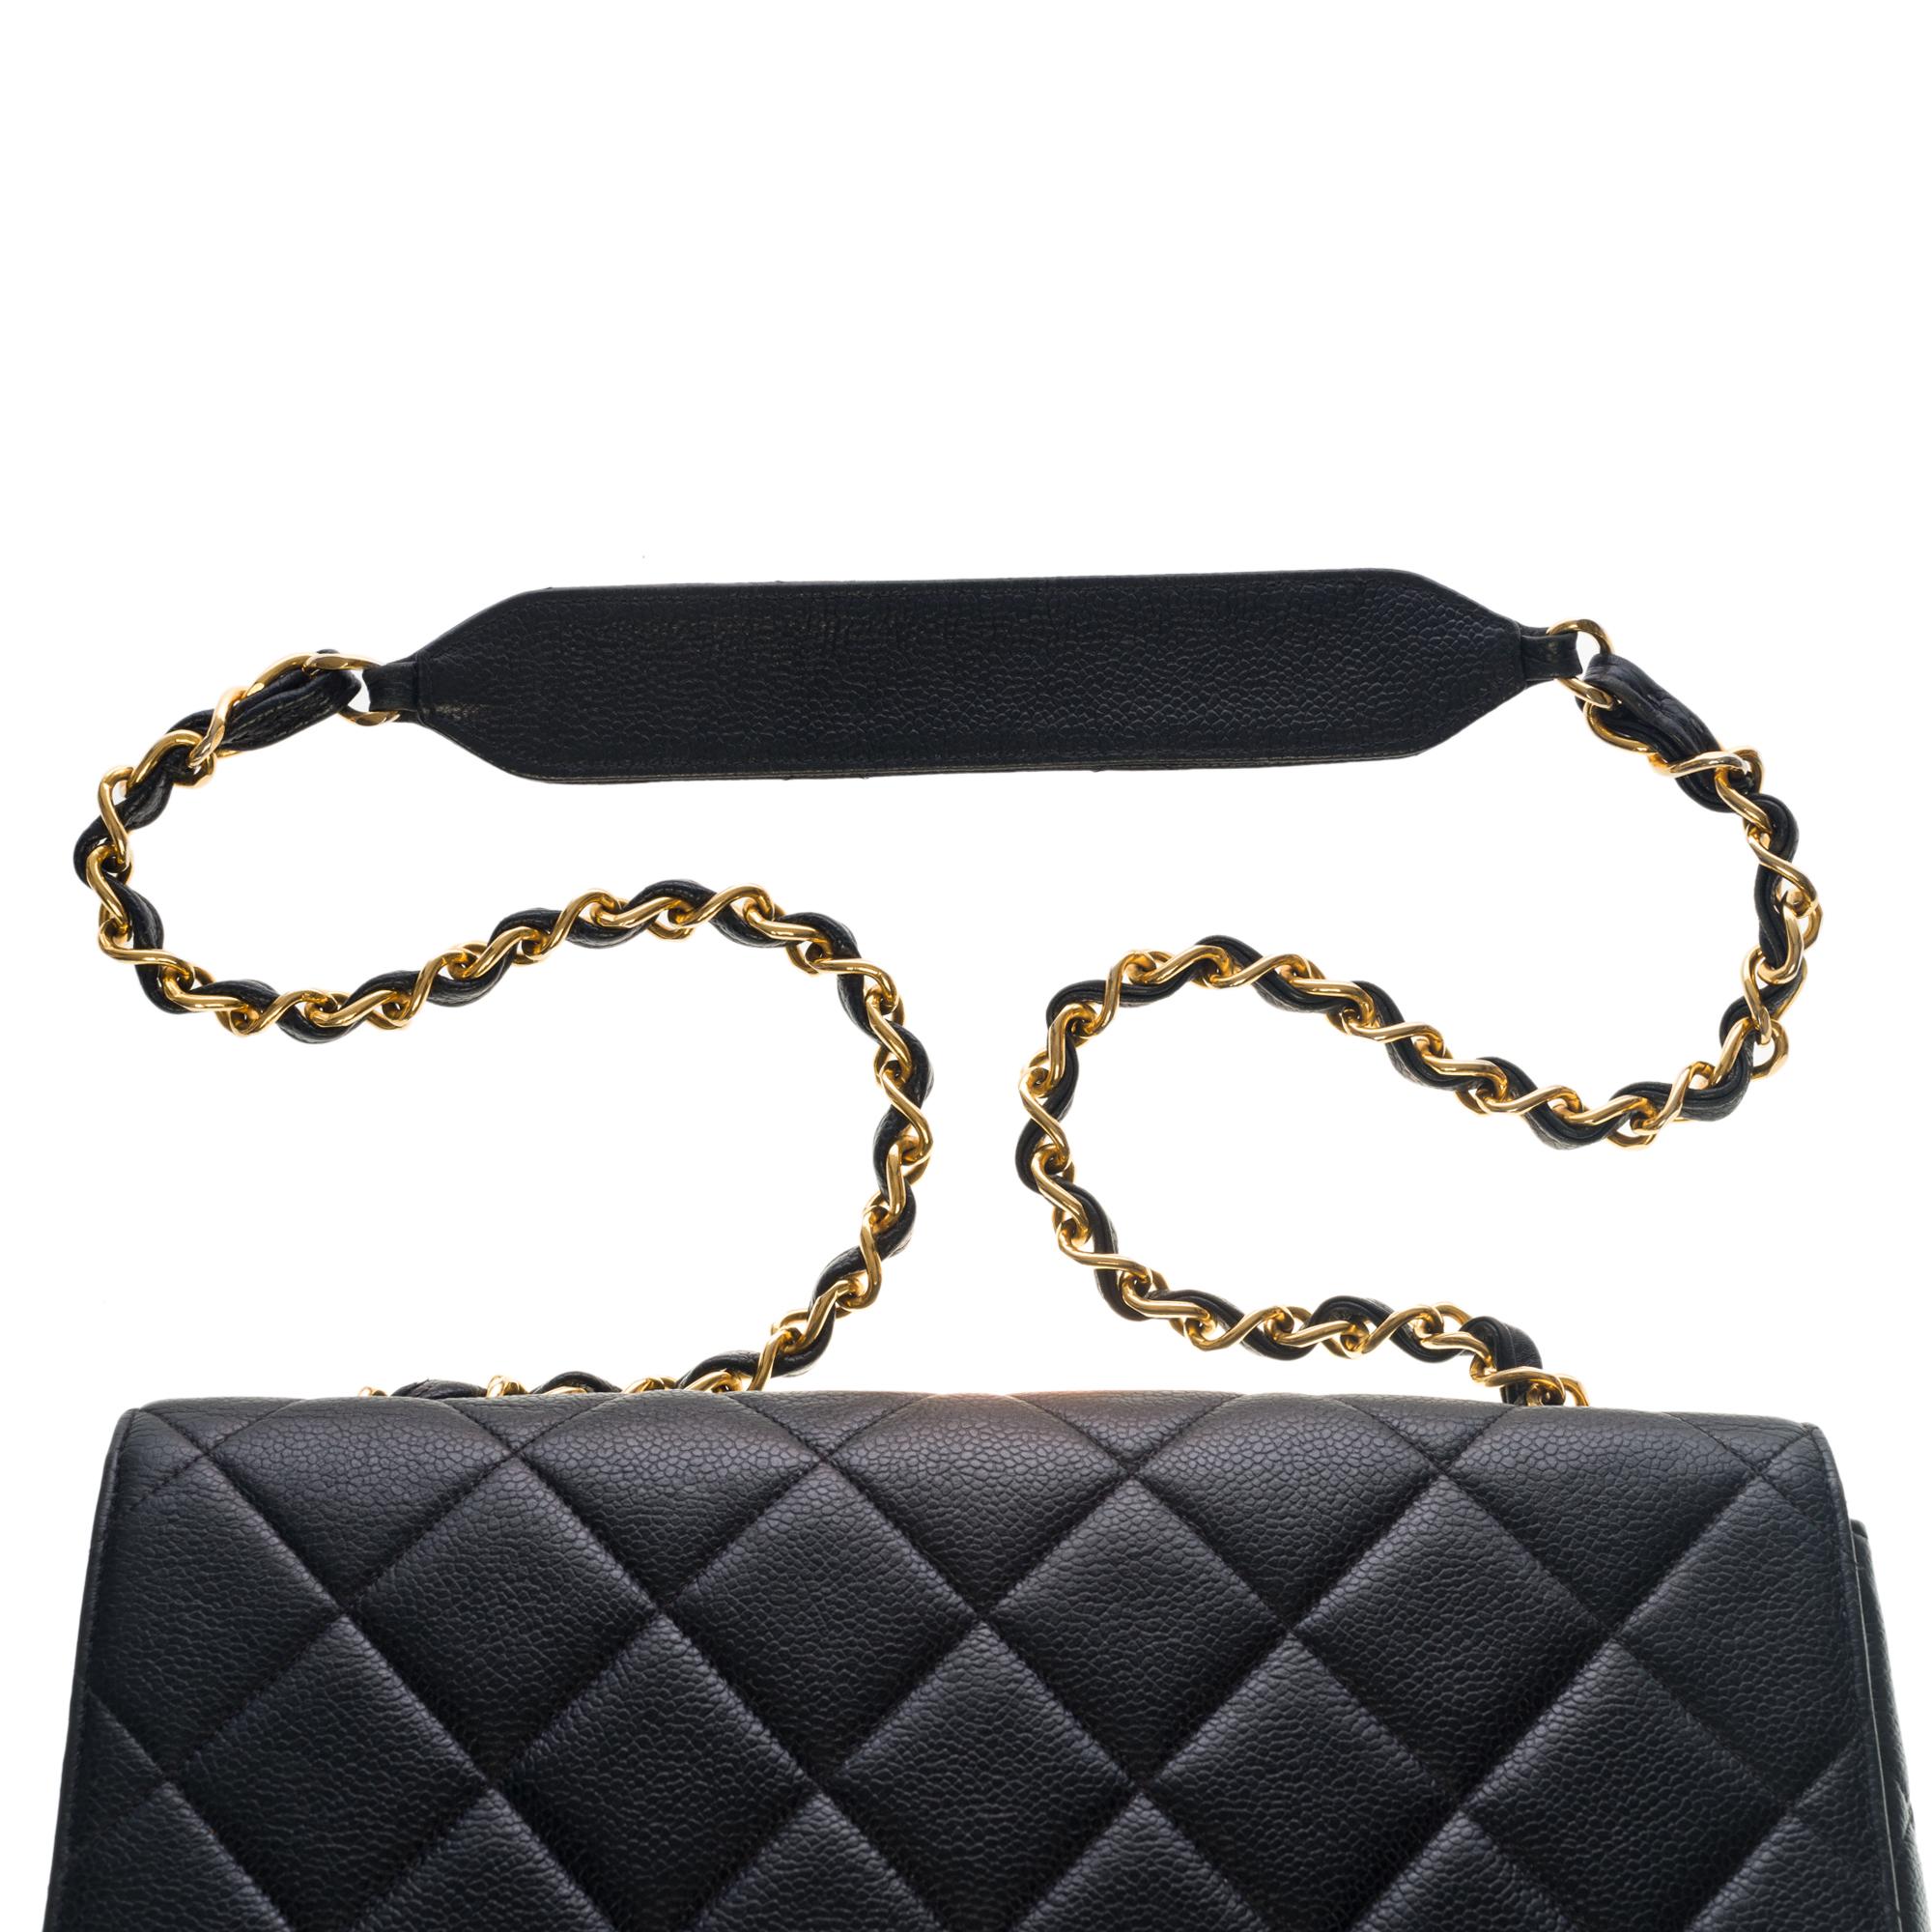 Rare Chanel Maxi shoulder flap bag in black caviar quilted leather, GHW 3